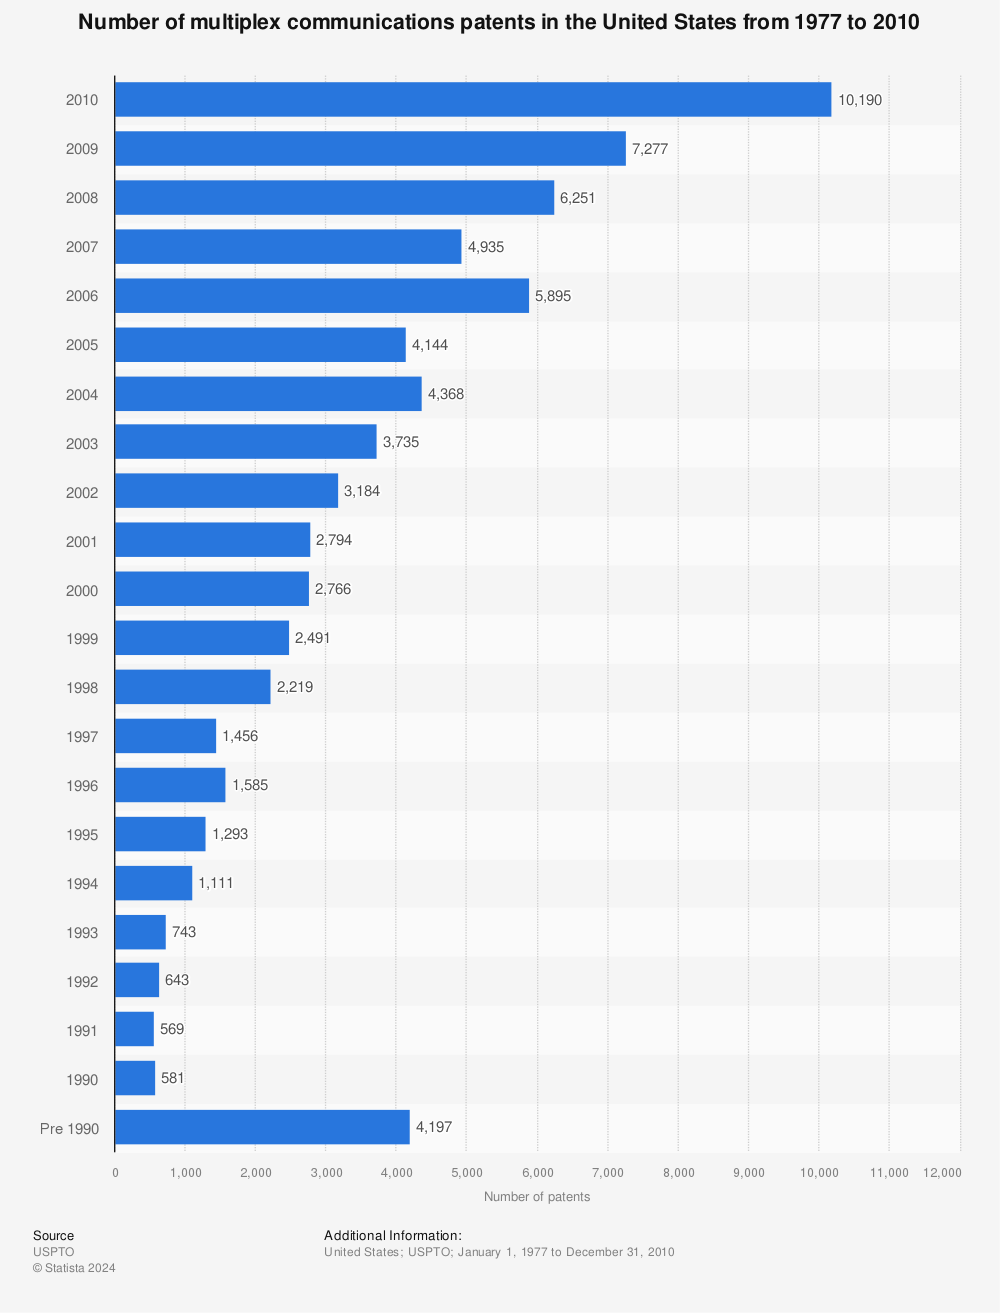 Statistic: Number of multiplex communications patents in the United States from 1977 to 2010 | Statista